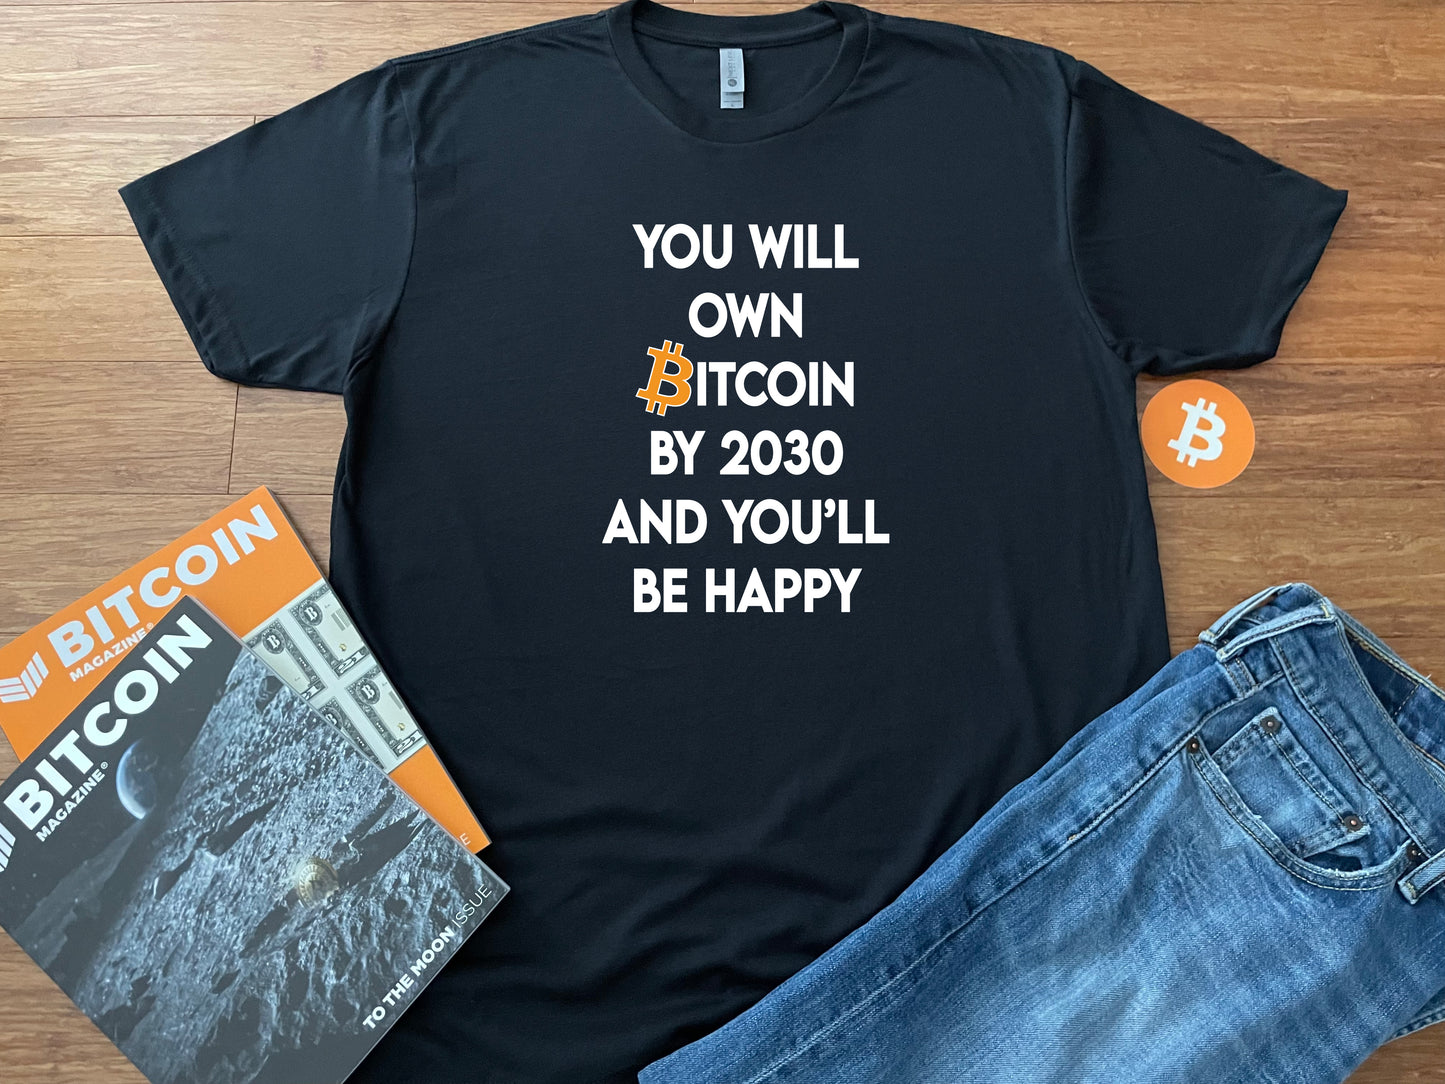 You will own Bitcoin by 2030